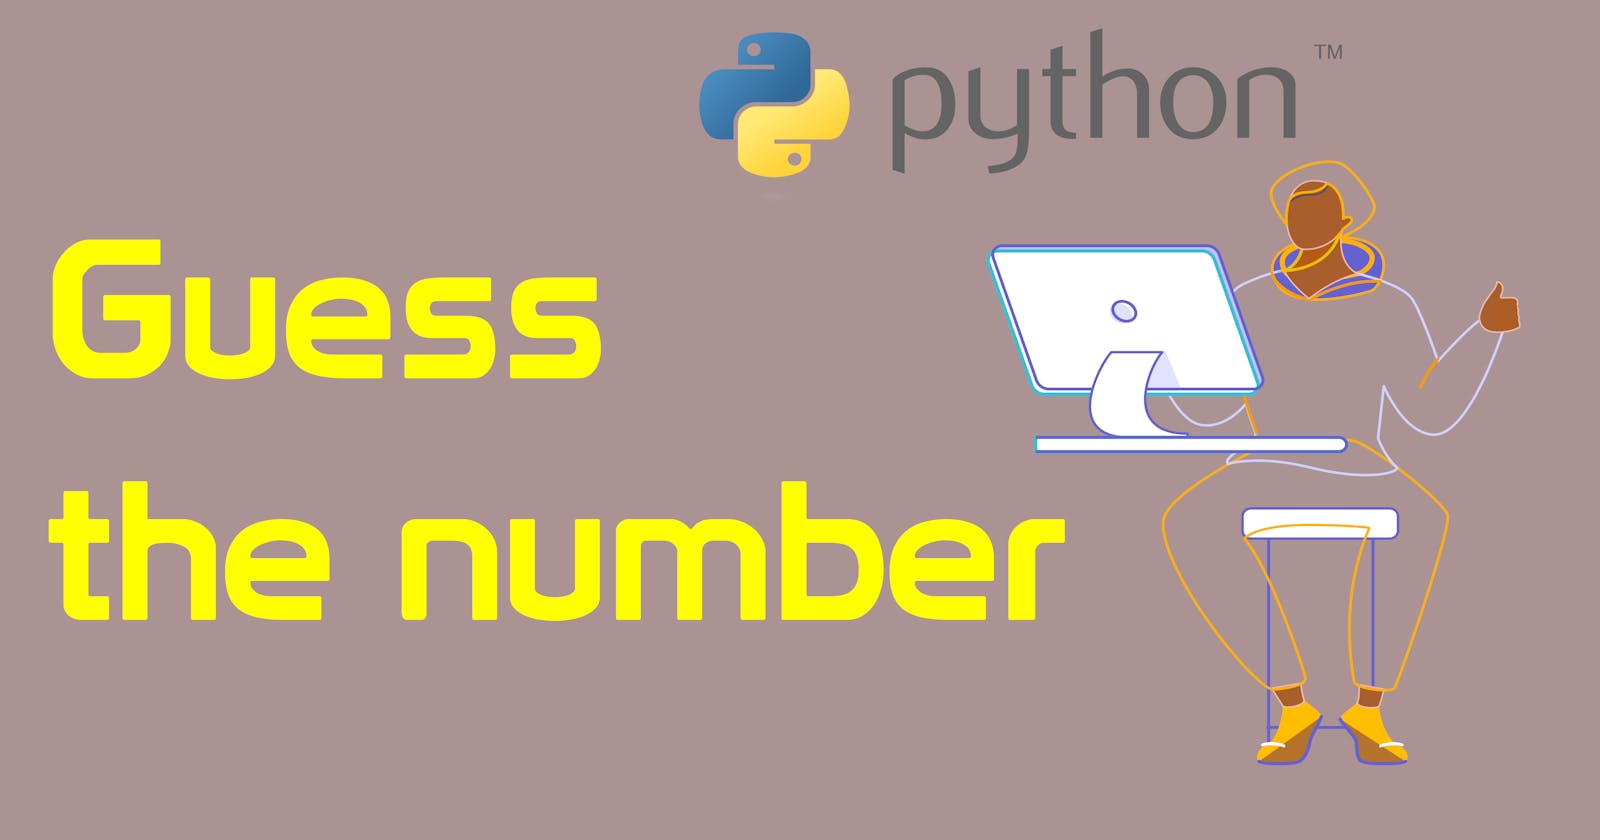 Guess the number game using Python and Tkinter